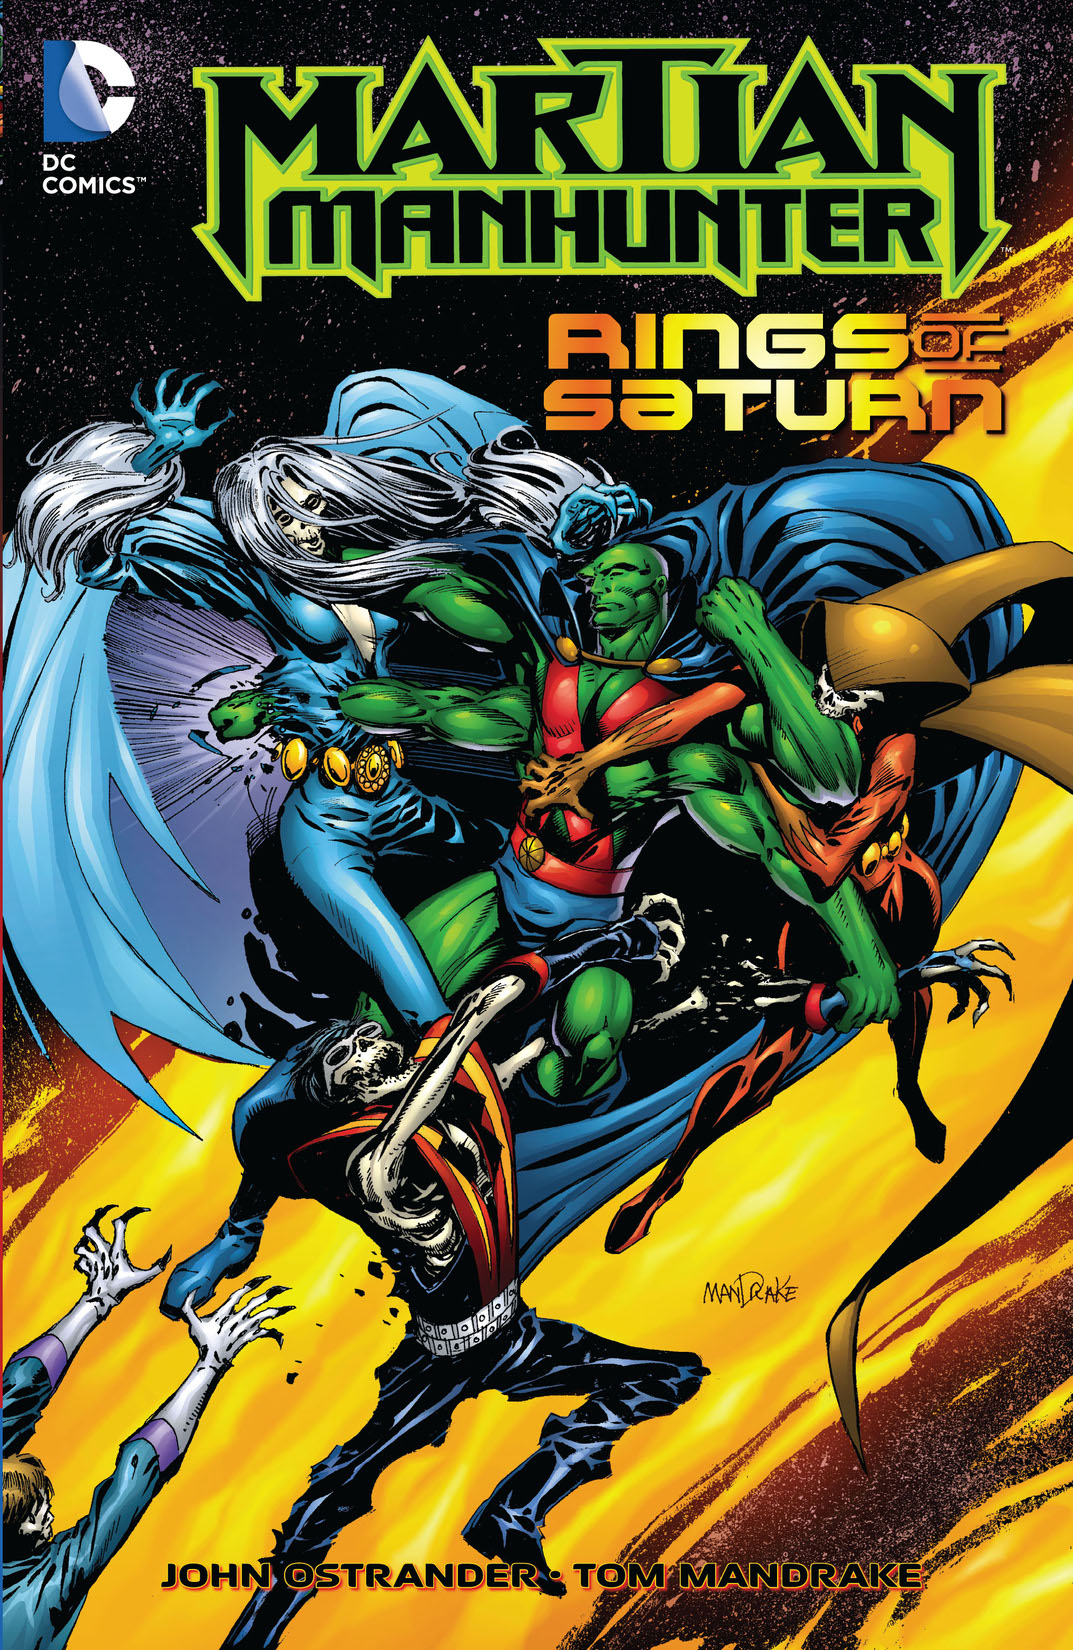 Martian Manhunter: Rings of Saturn preview images